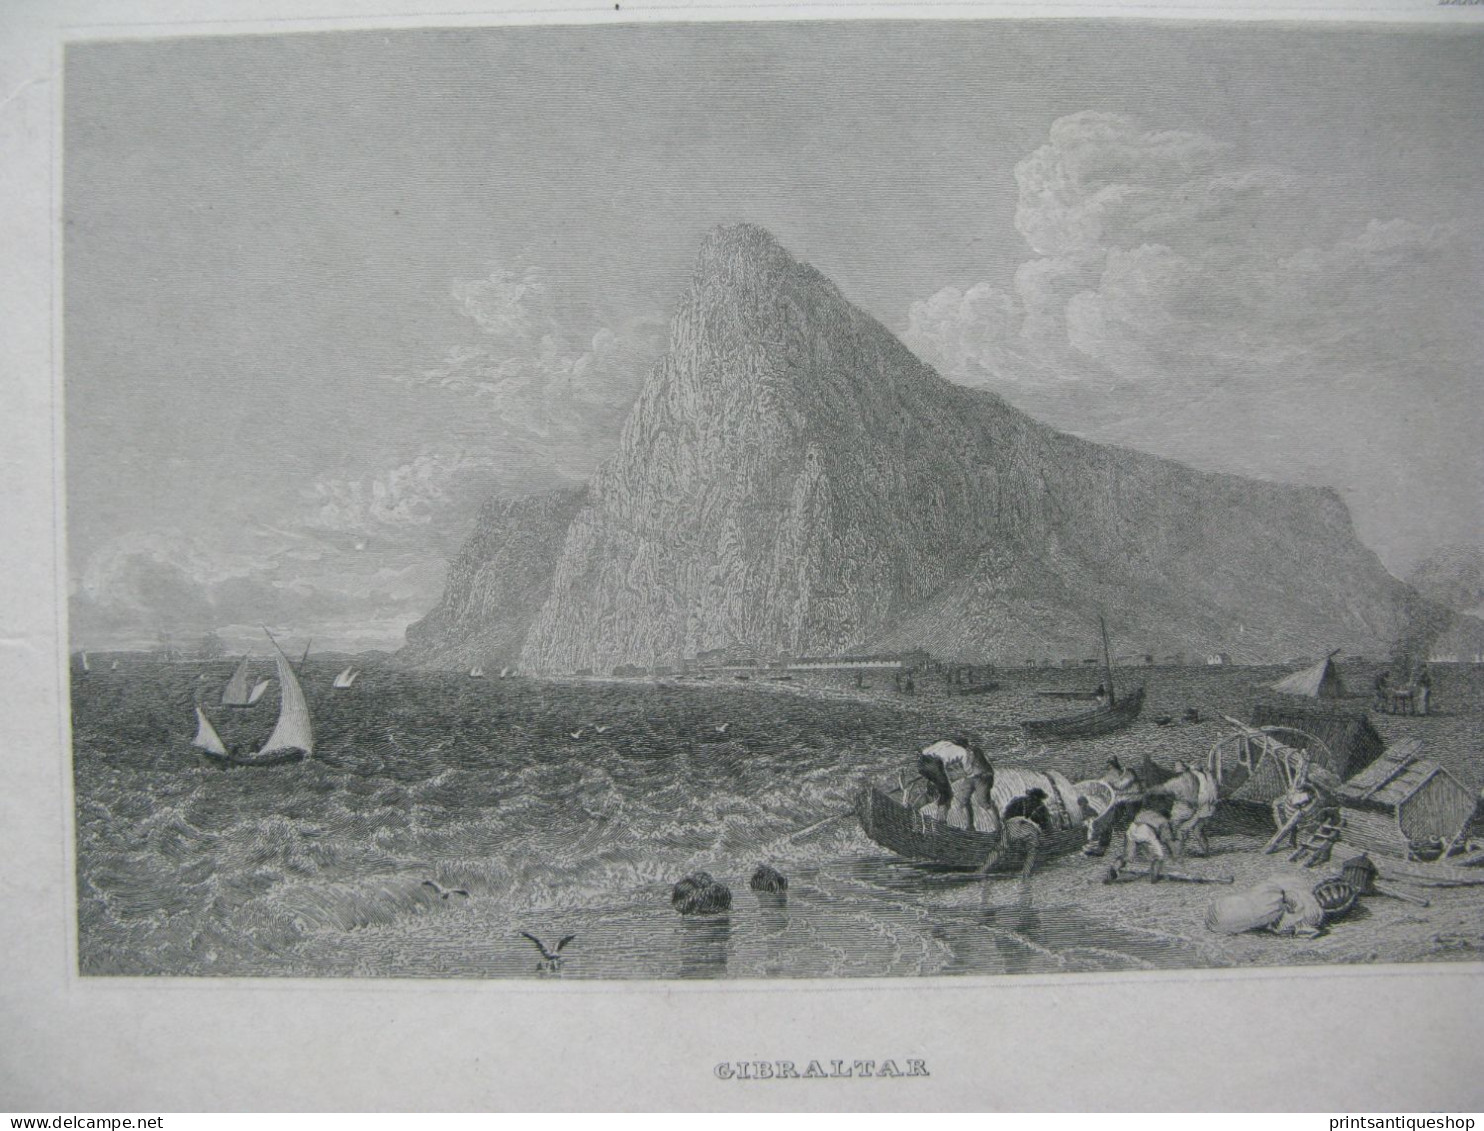 Spain 4x Antique Engraving Gibraltar St George Hall Cadiz Andalusia Madrid - Prints & Engravings